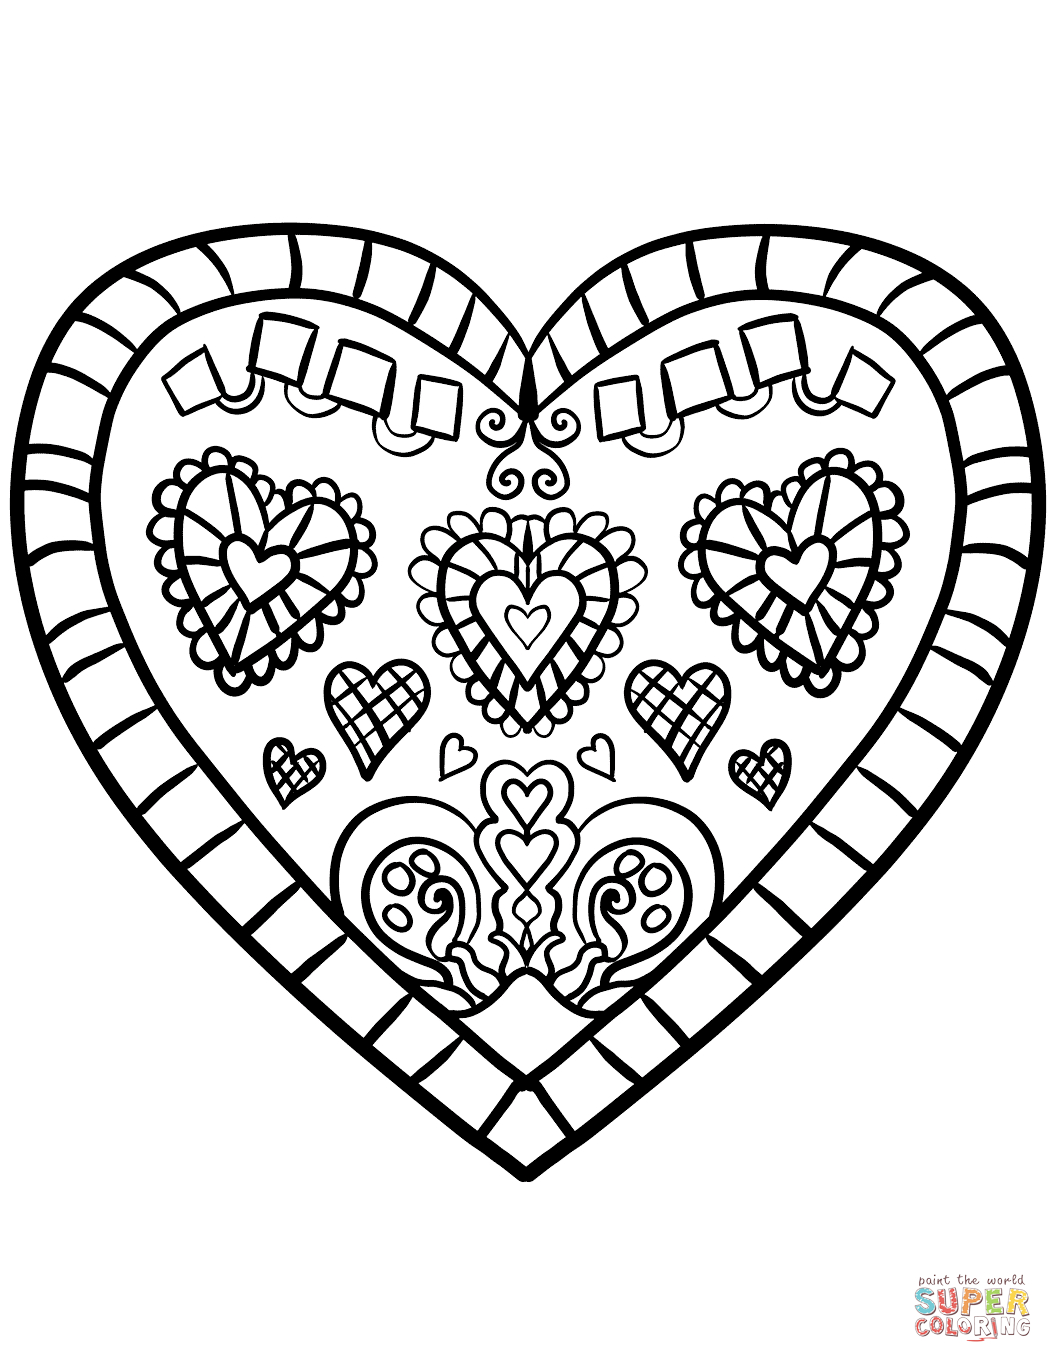 Heart Coloring Pages | Free Printable Pictures - Free Printable Heart Coloring Pages